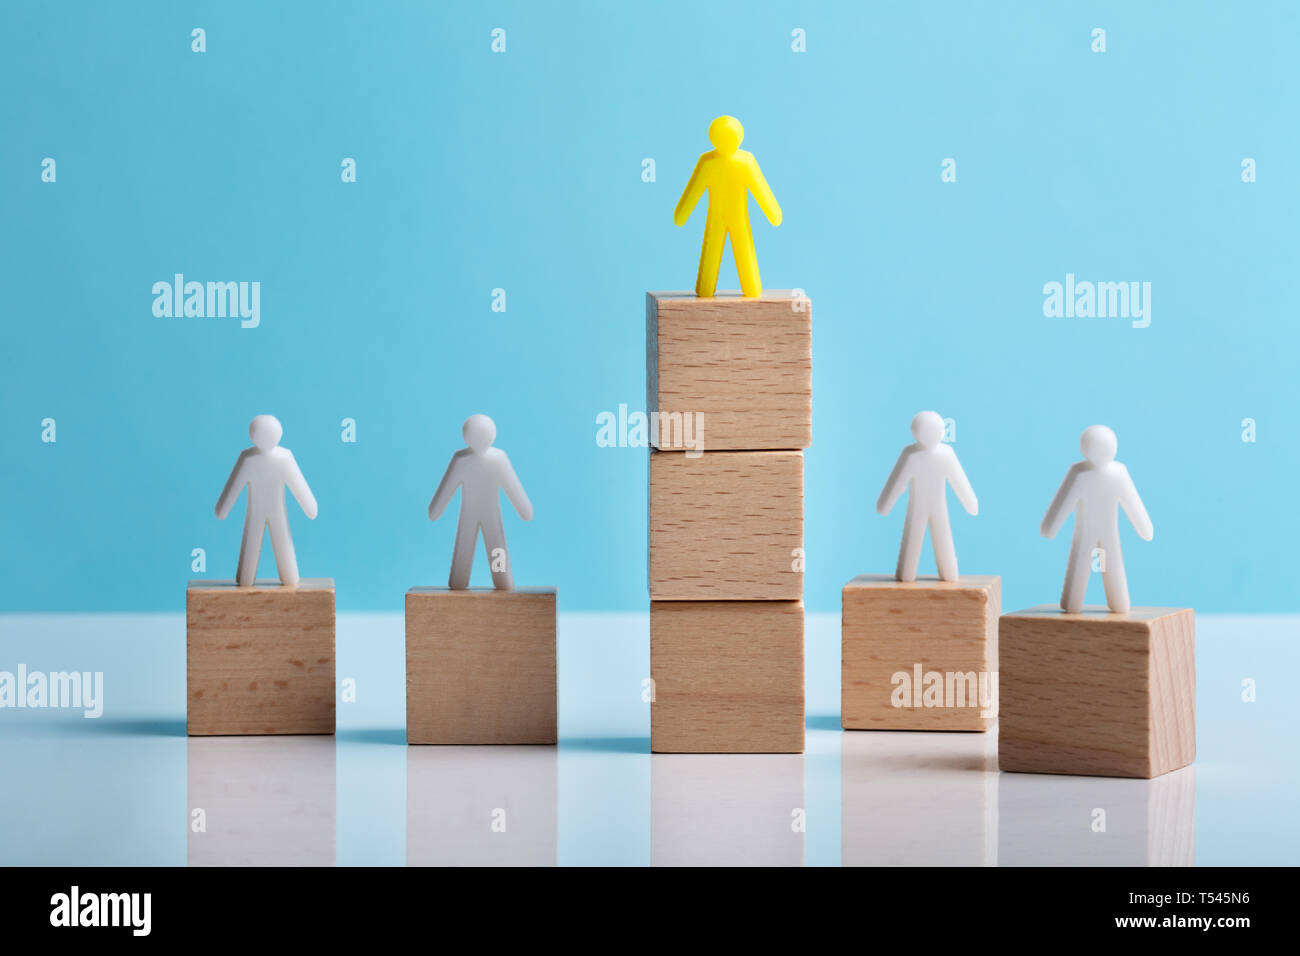 Human Dummy Figure On Wooden Block Over The White Desk Against Blue Background Stock Photo